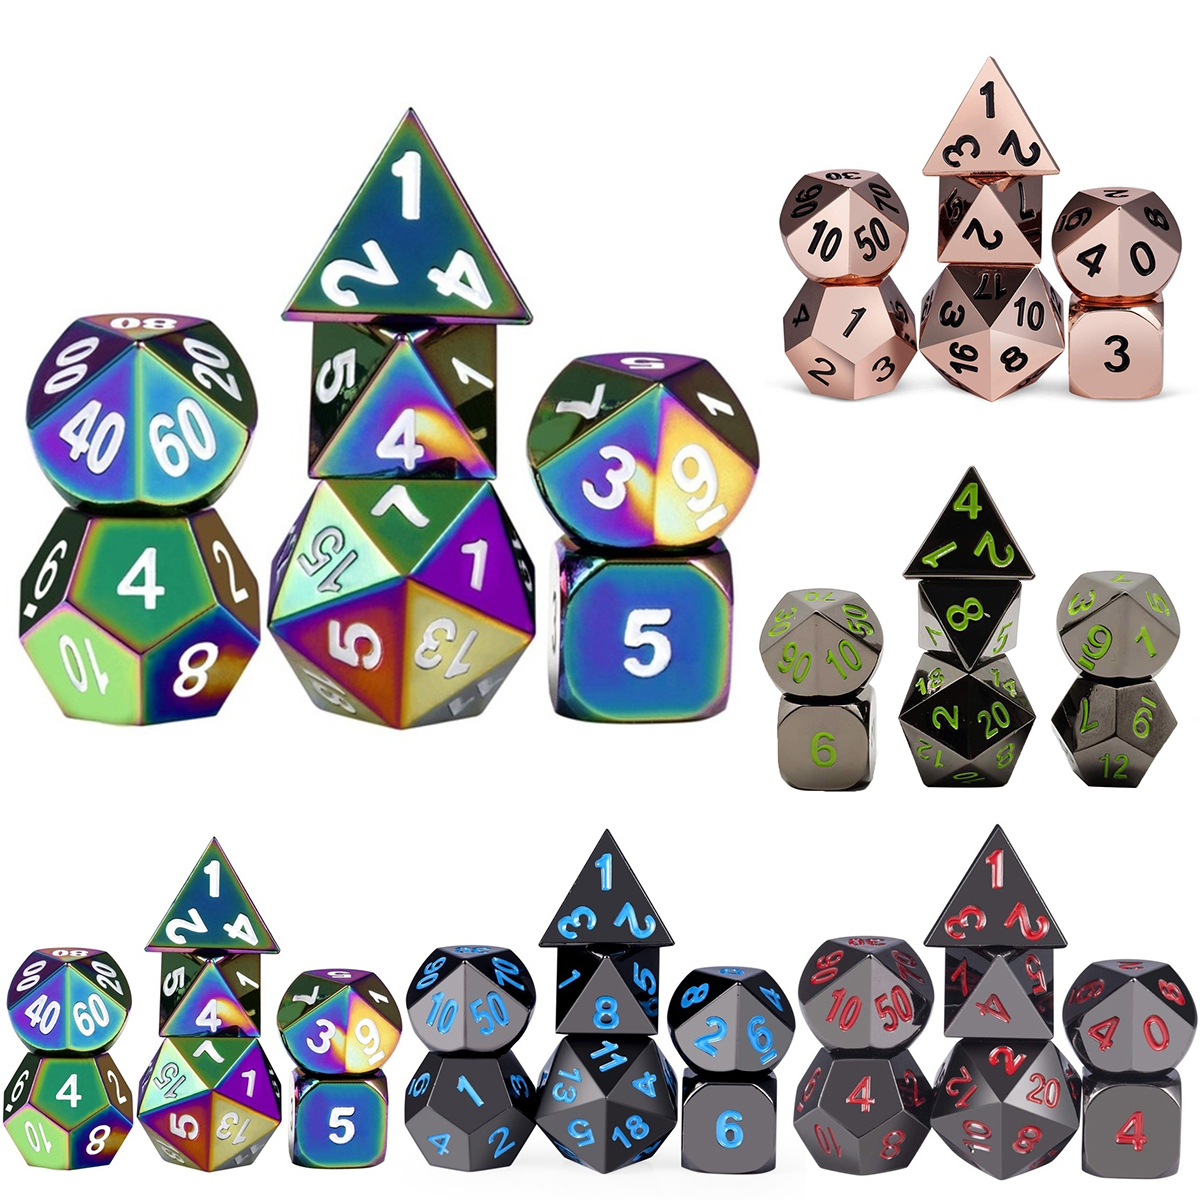 7-PcsSet-Metal-Dice-Set-Role-Playing-Dragons-Table-Game-With-Cloth-Bag-Bar-Party-Game-Dice-1677684-2